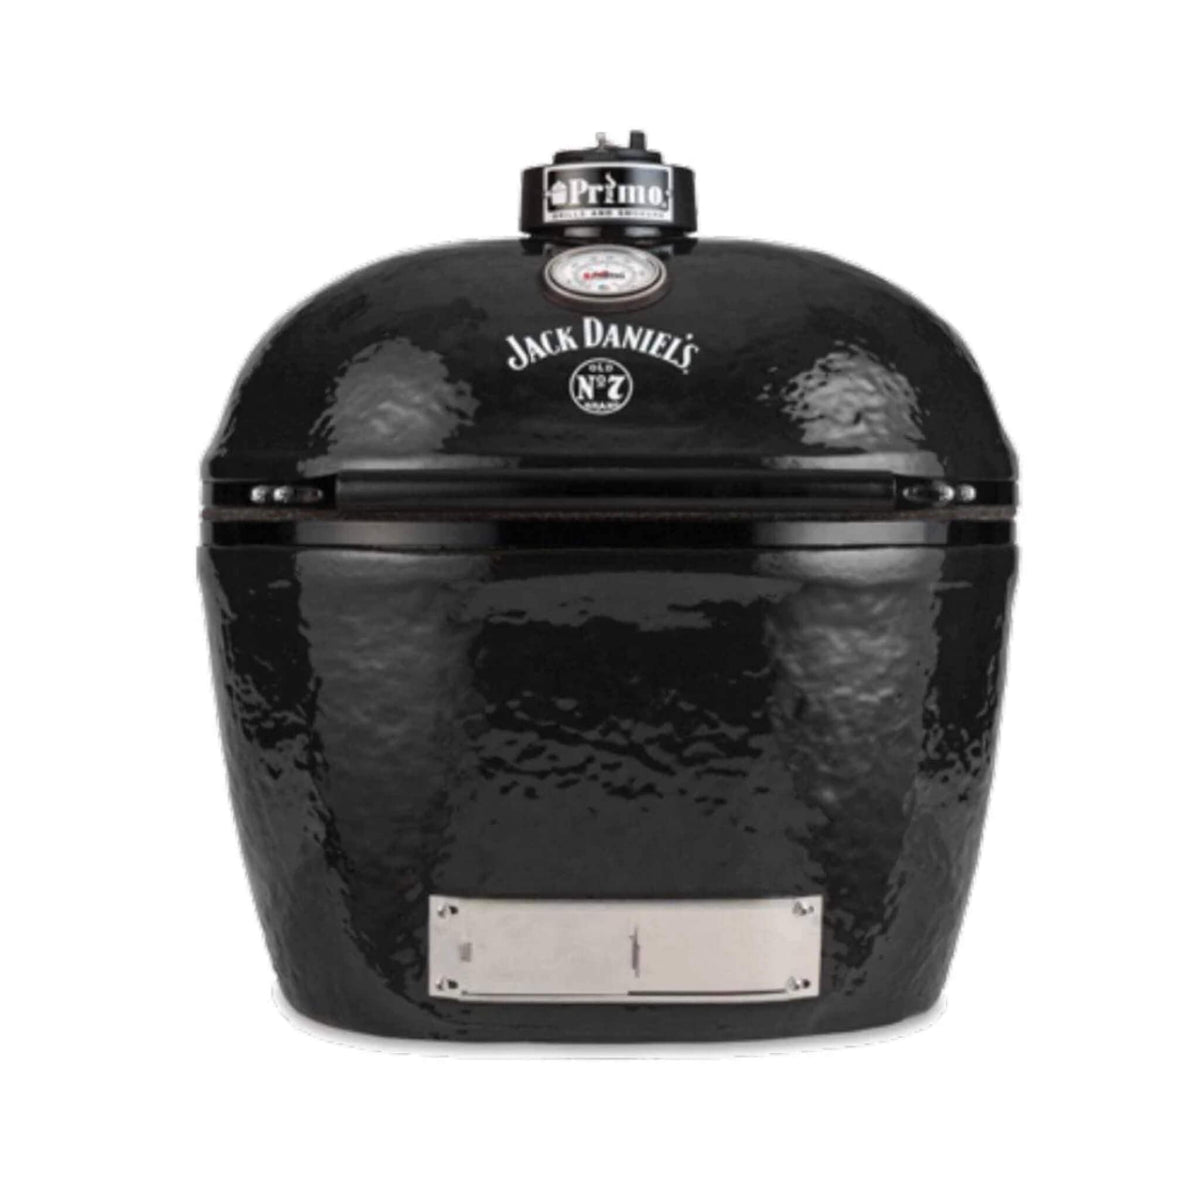 Primo X-Large 400 Oval Ceramic Kamado Grill with Stainless Steel Grates - Jack Daniel’s Edition - Culinary Hardware